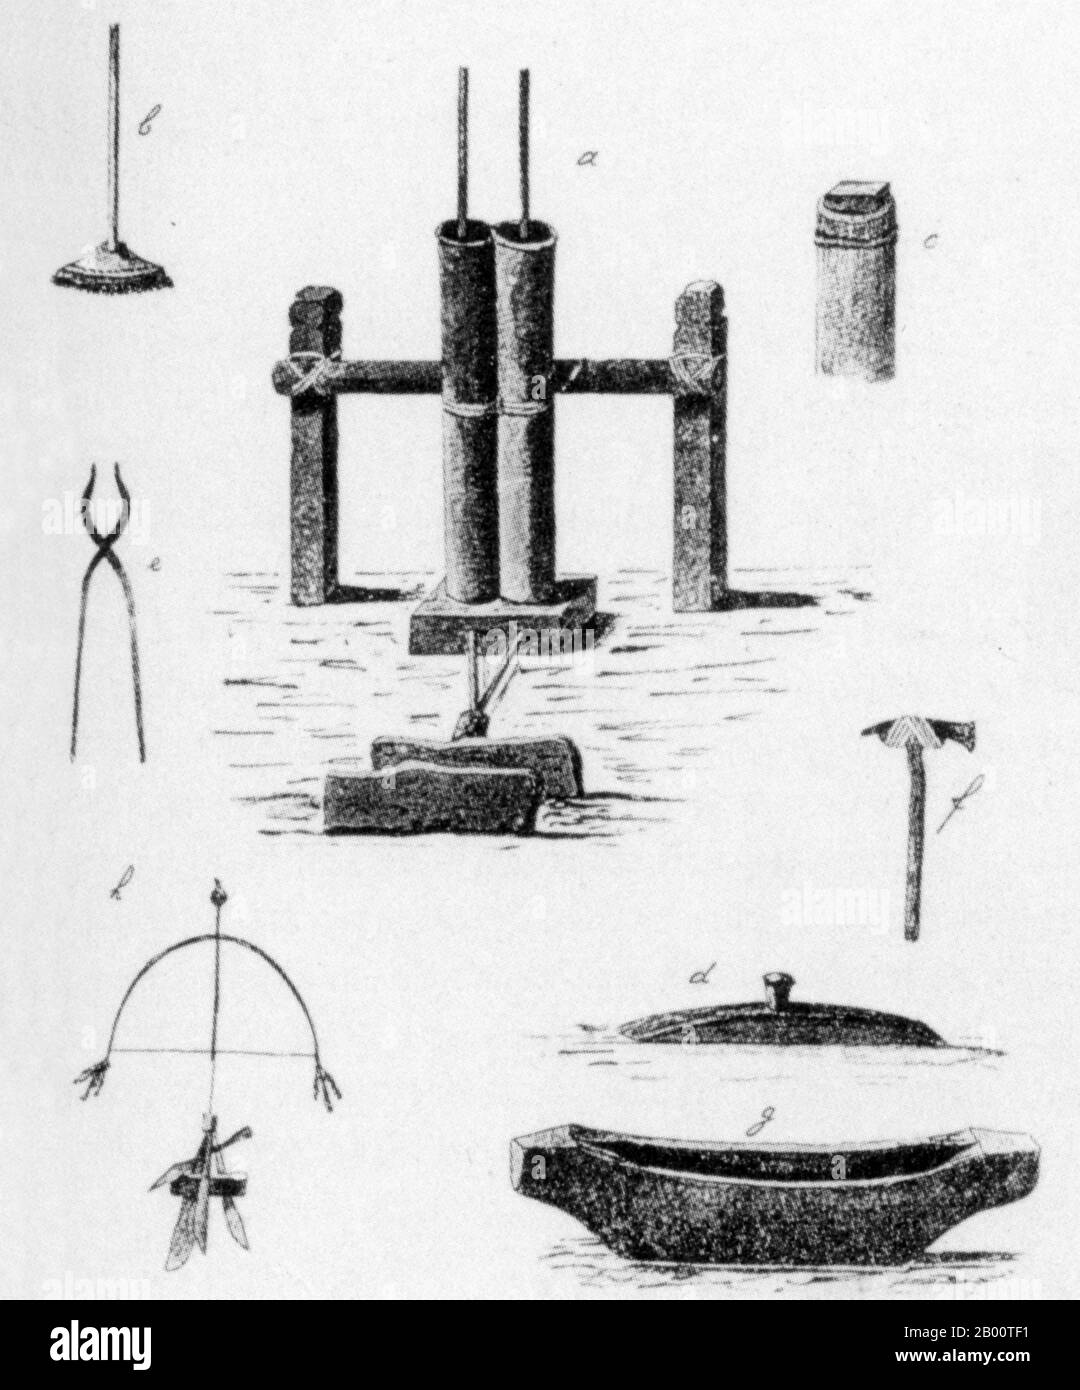 Indonesia: A pictorial list of iron-making equipment in central Sulawesi, c. 1900.  (a) oven and bellows (b) bellows piston (c) large anvil (d) small anvil (e) tongs (f) hammer (g) water trough (h) ritual talisman Stock Photo